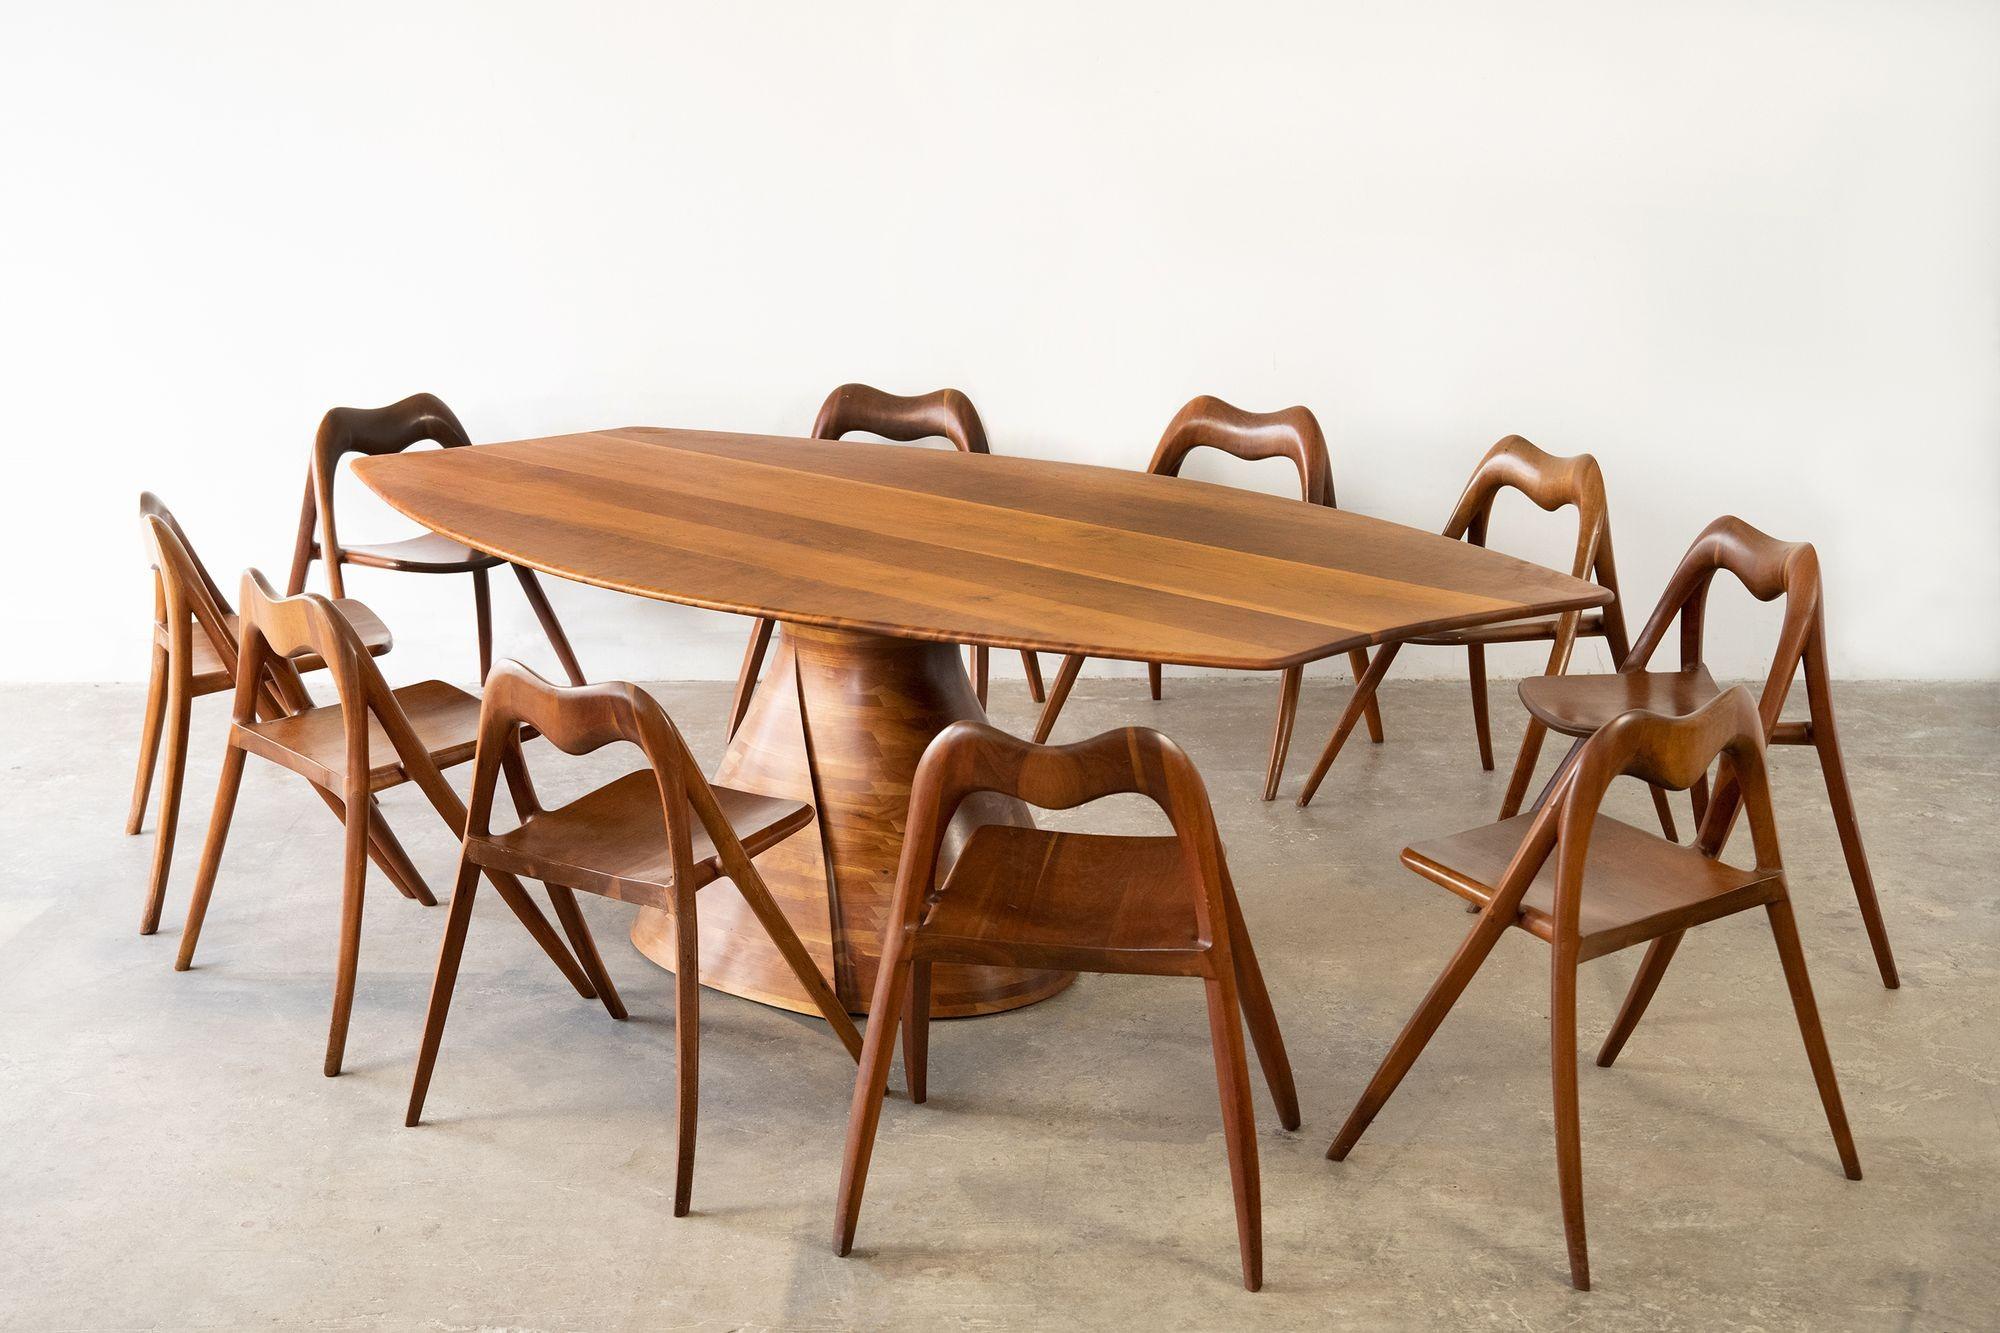 Claude Terrell Magnum Opus Dining Set 1970s Organic Studio Crafted Modernism For Sale 3